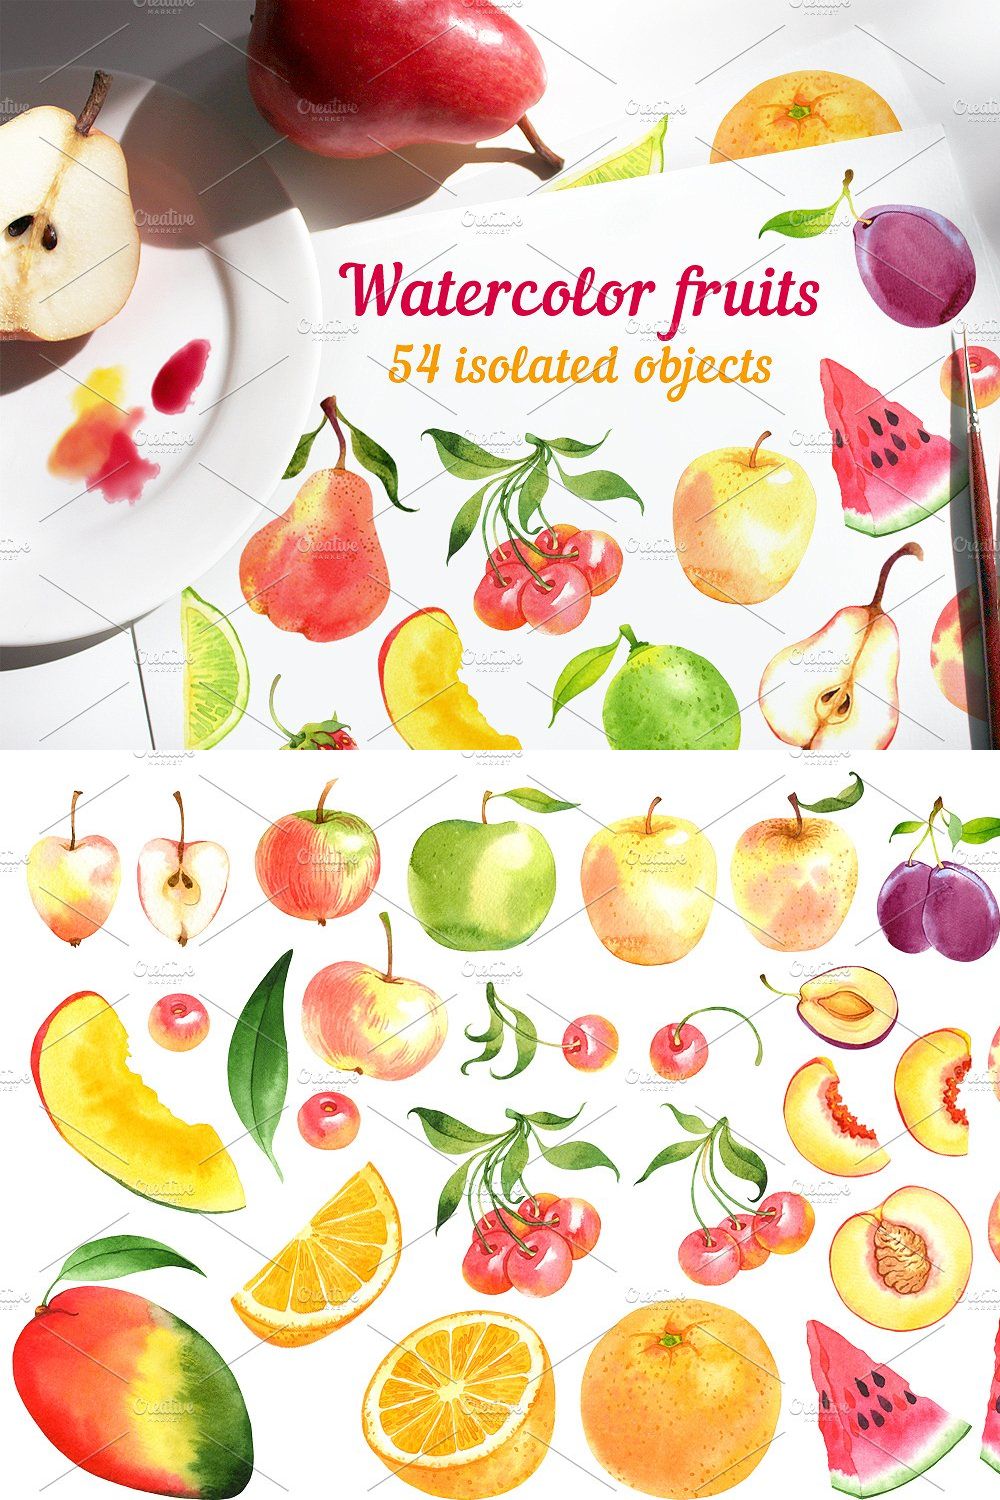 Watercolor fruits pinterest preview image.